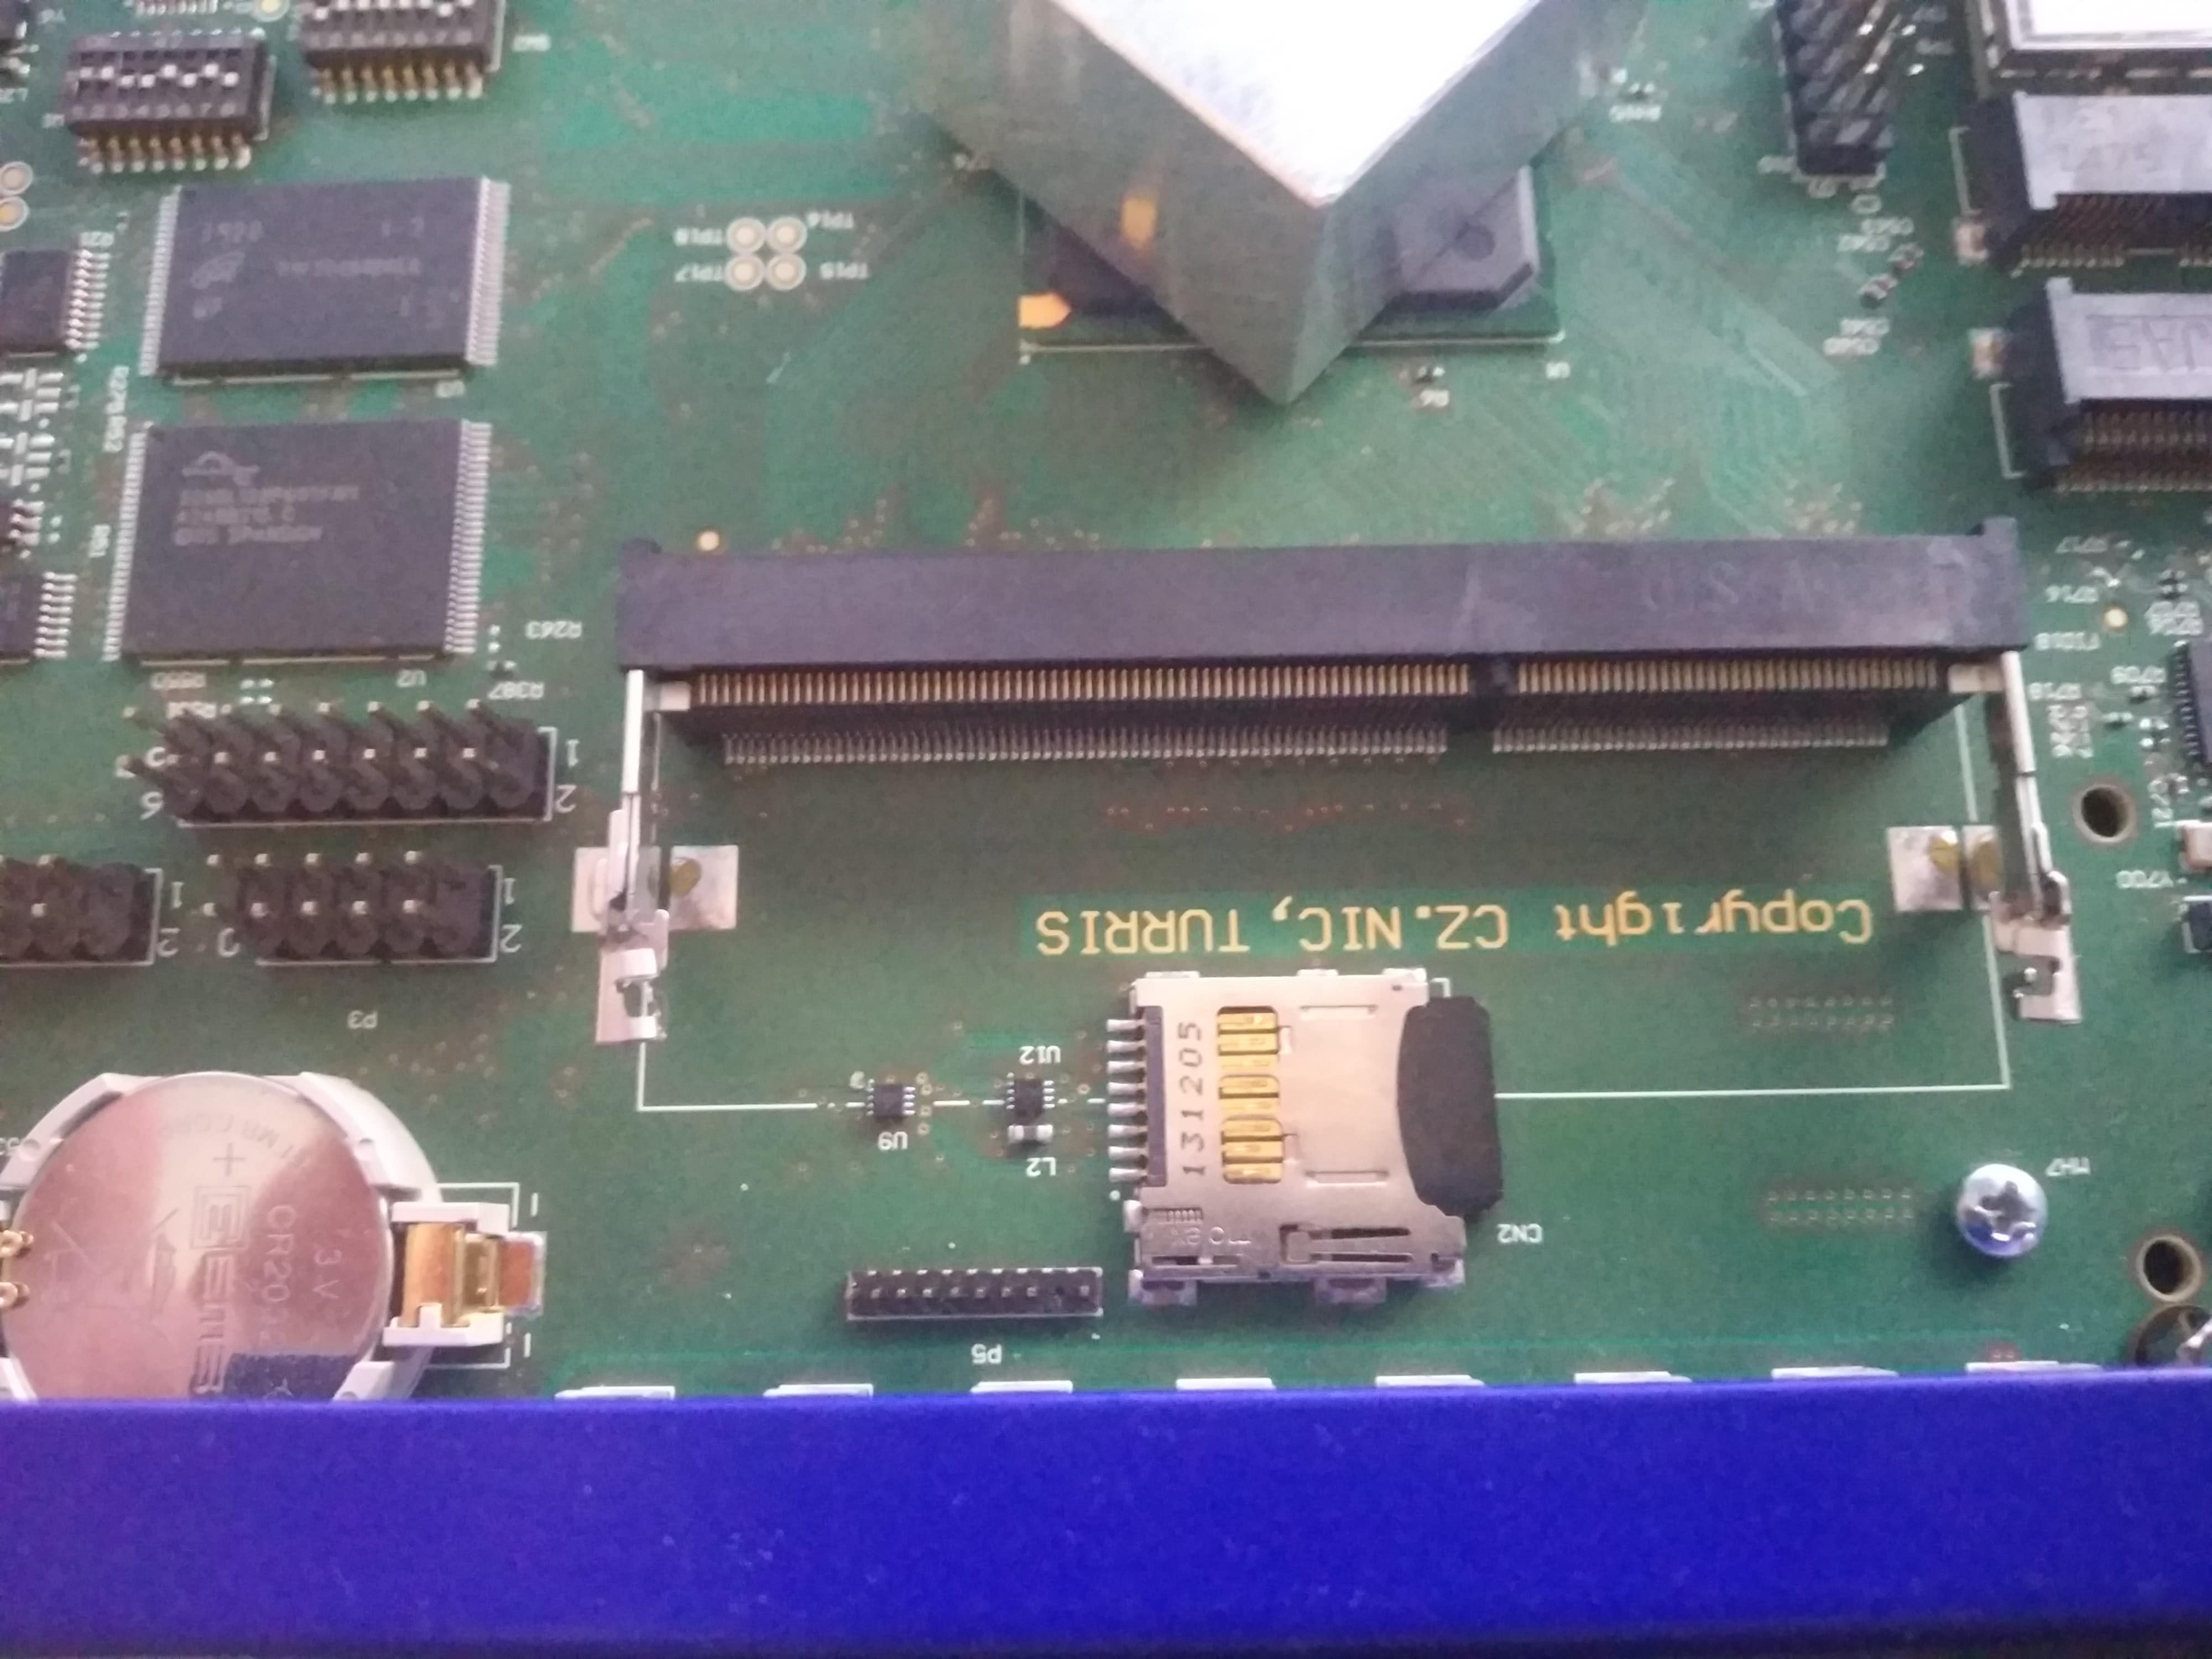 RAM module without RAM and inserted SD card